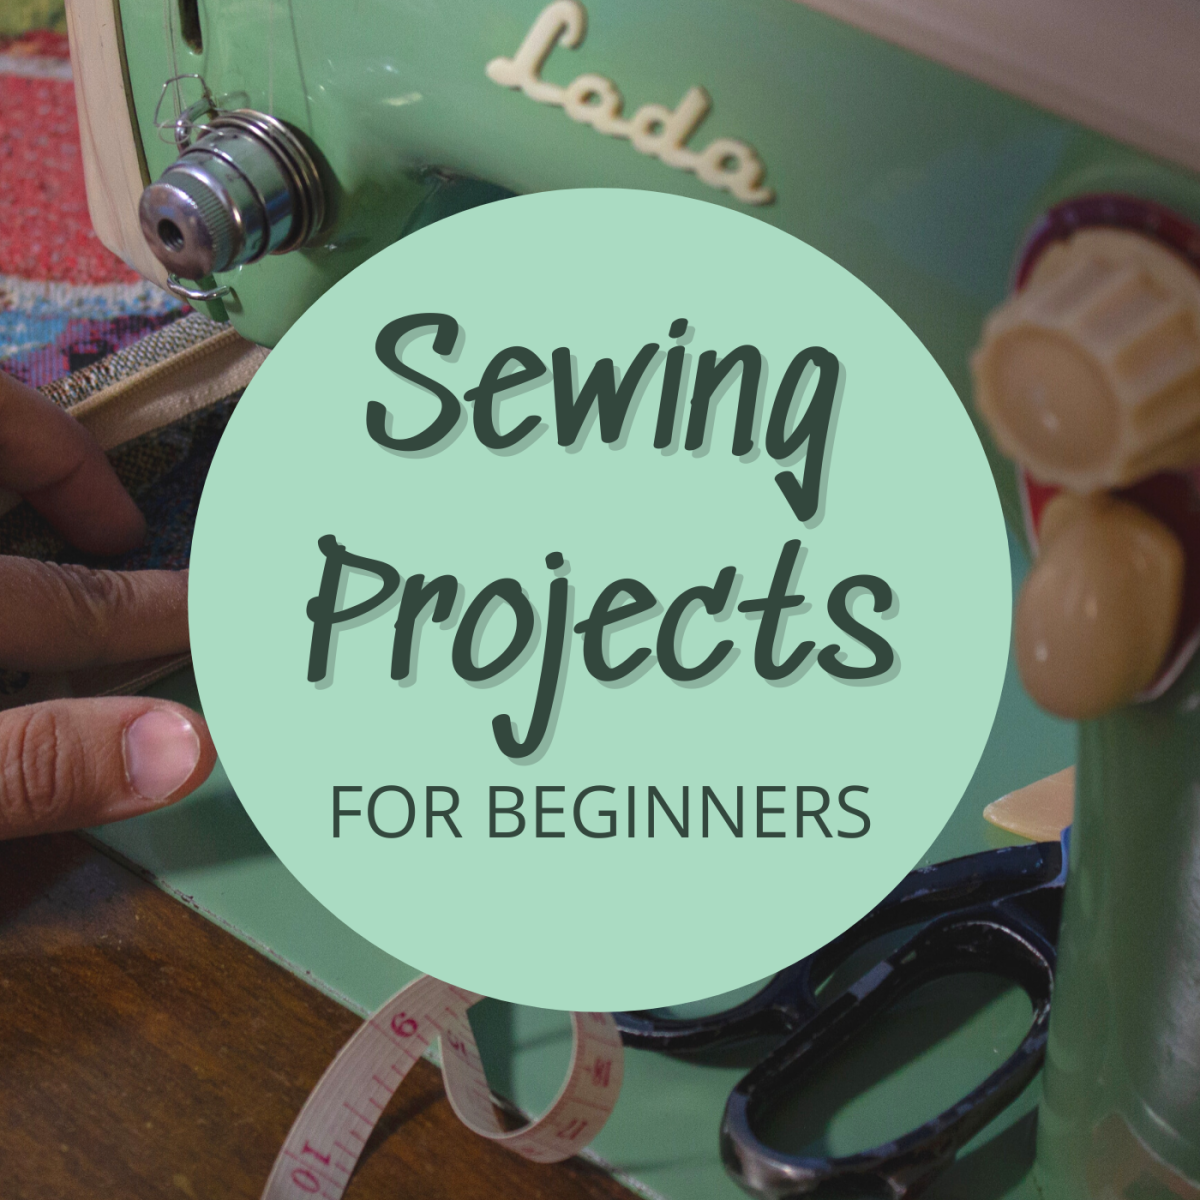 Got a new sewing machine? Learn how to use it by trying one of these easy projects.